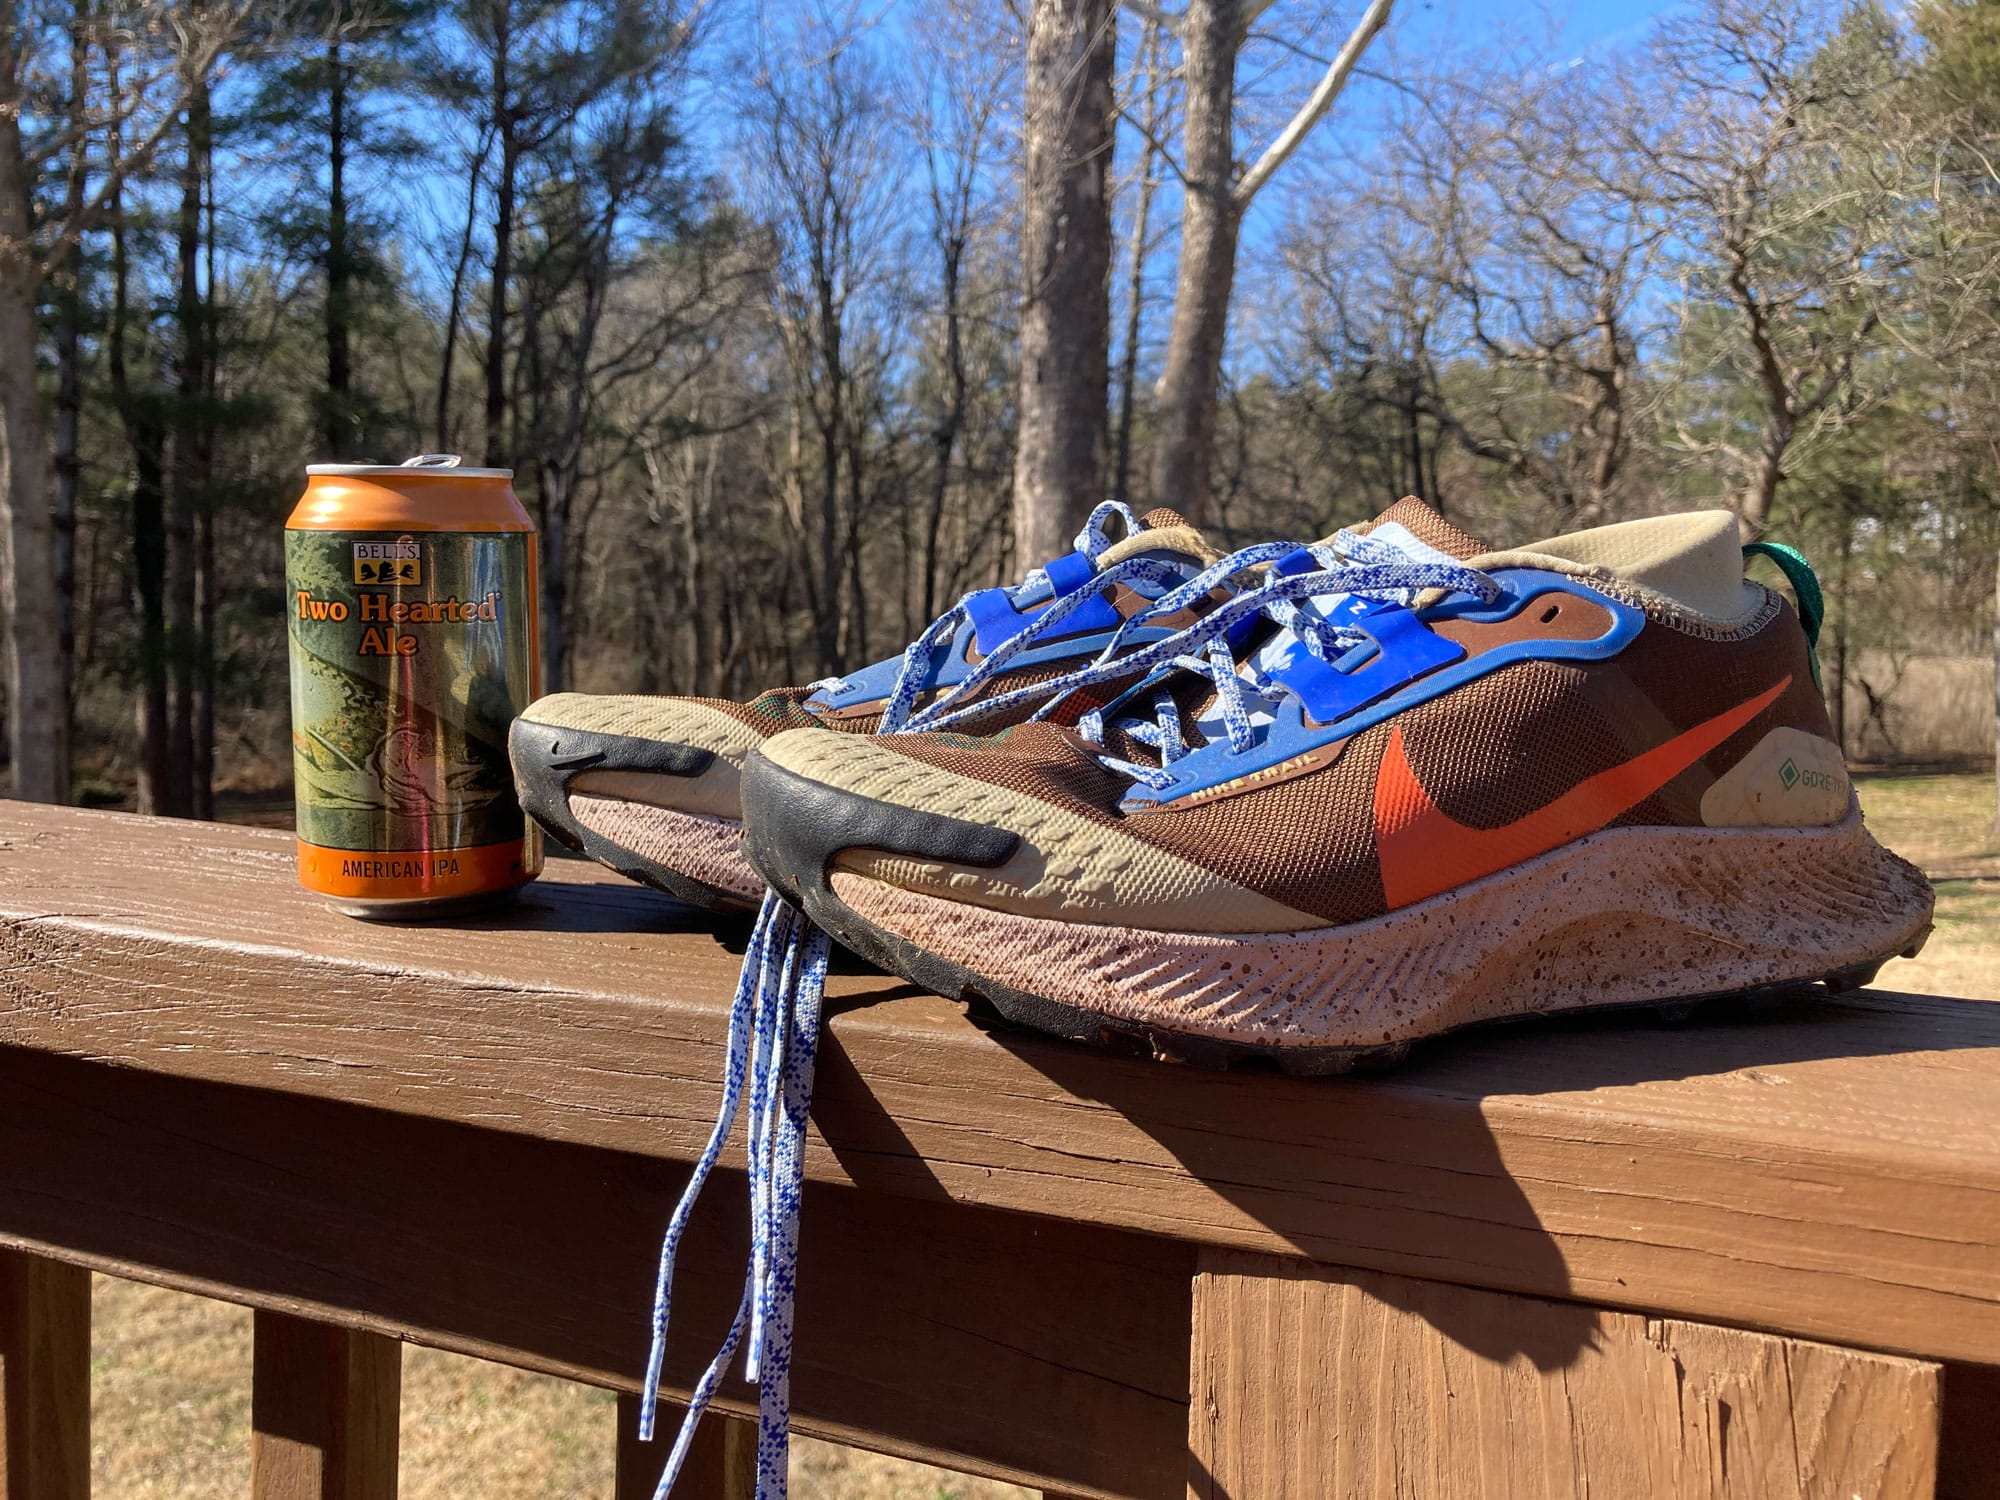 Running sneaker next to a can of beer on a wooden railing.